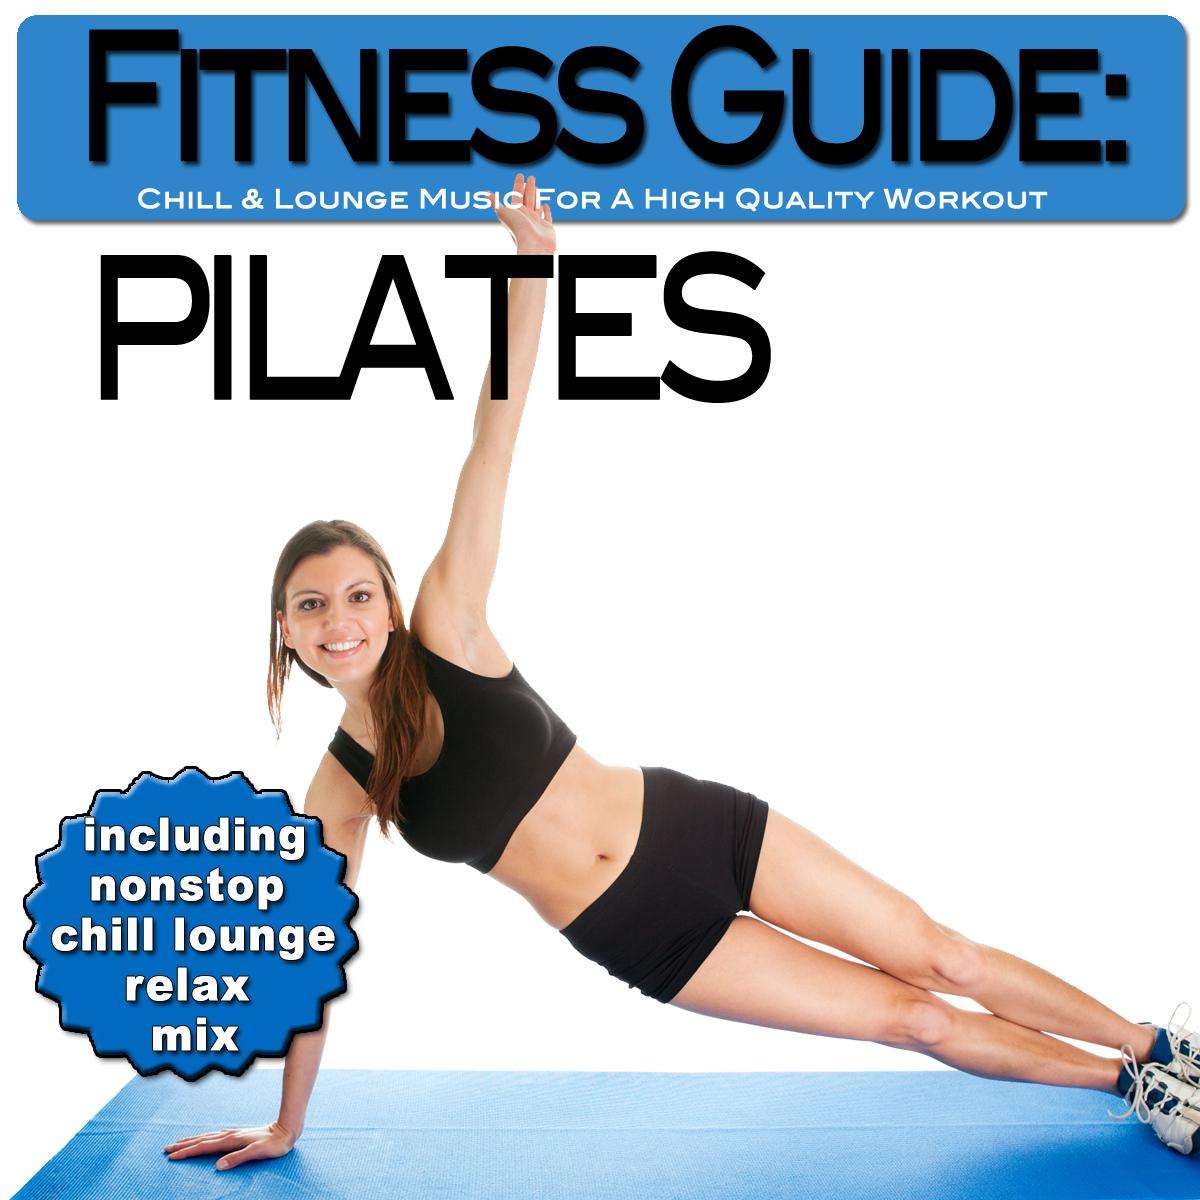 Fitness Guide: Pilates - Chill & Lounge Music For A High Quality Workout